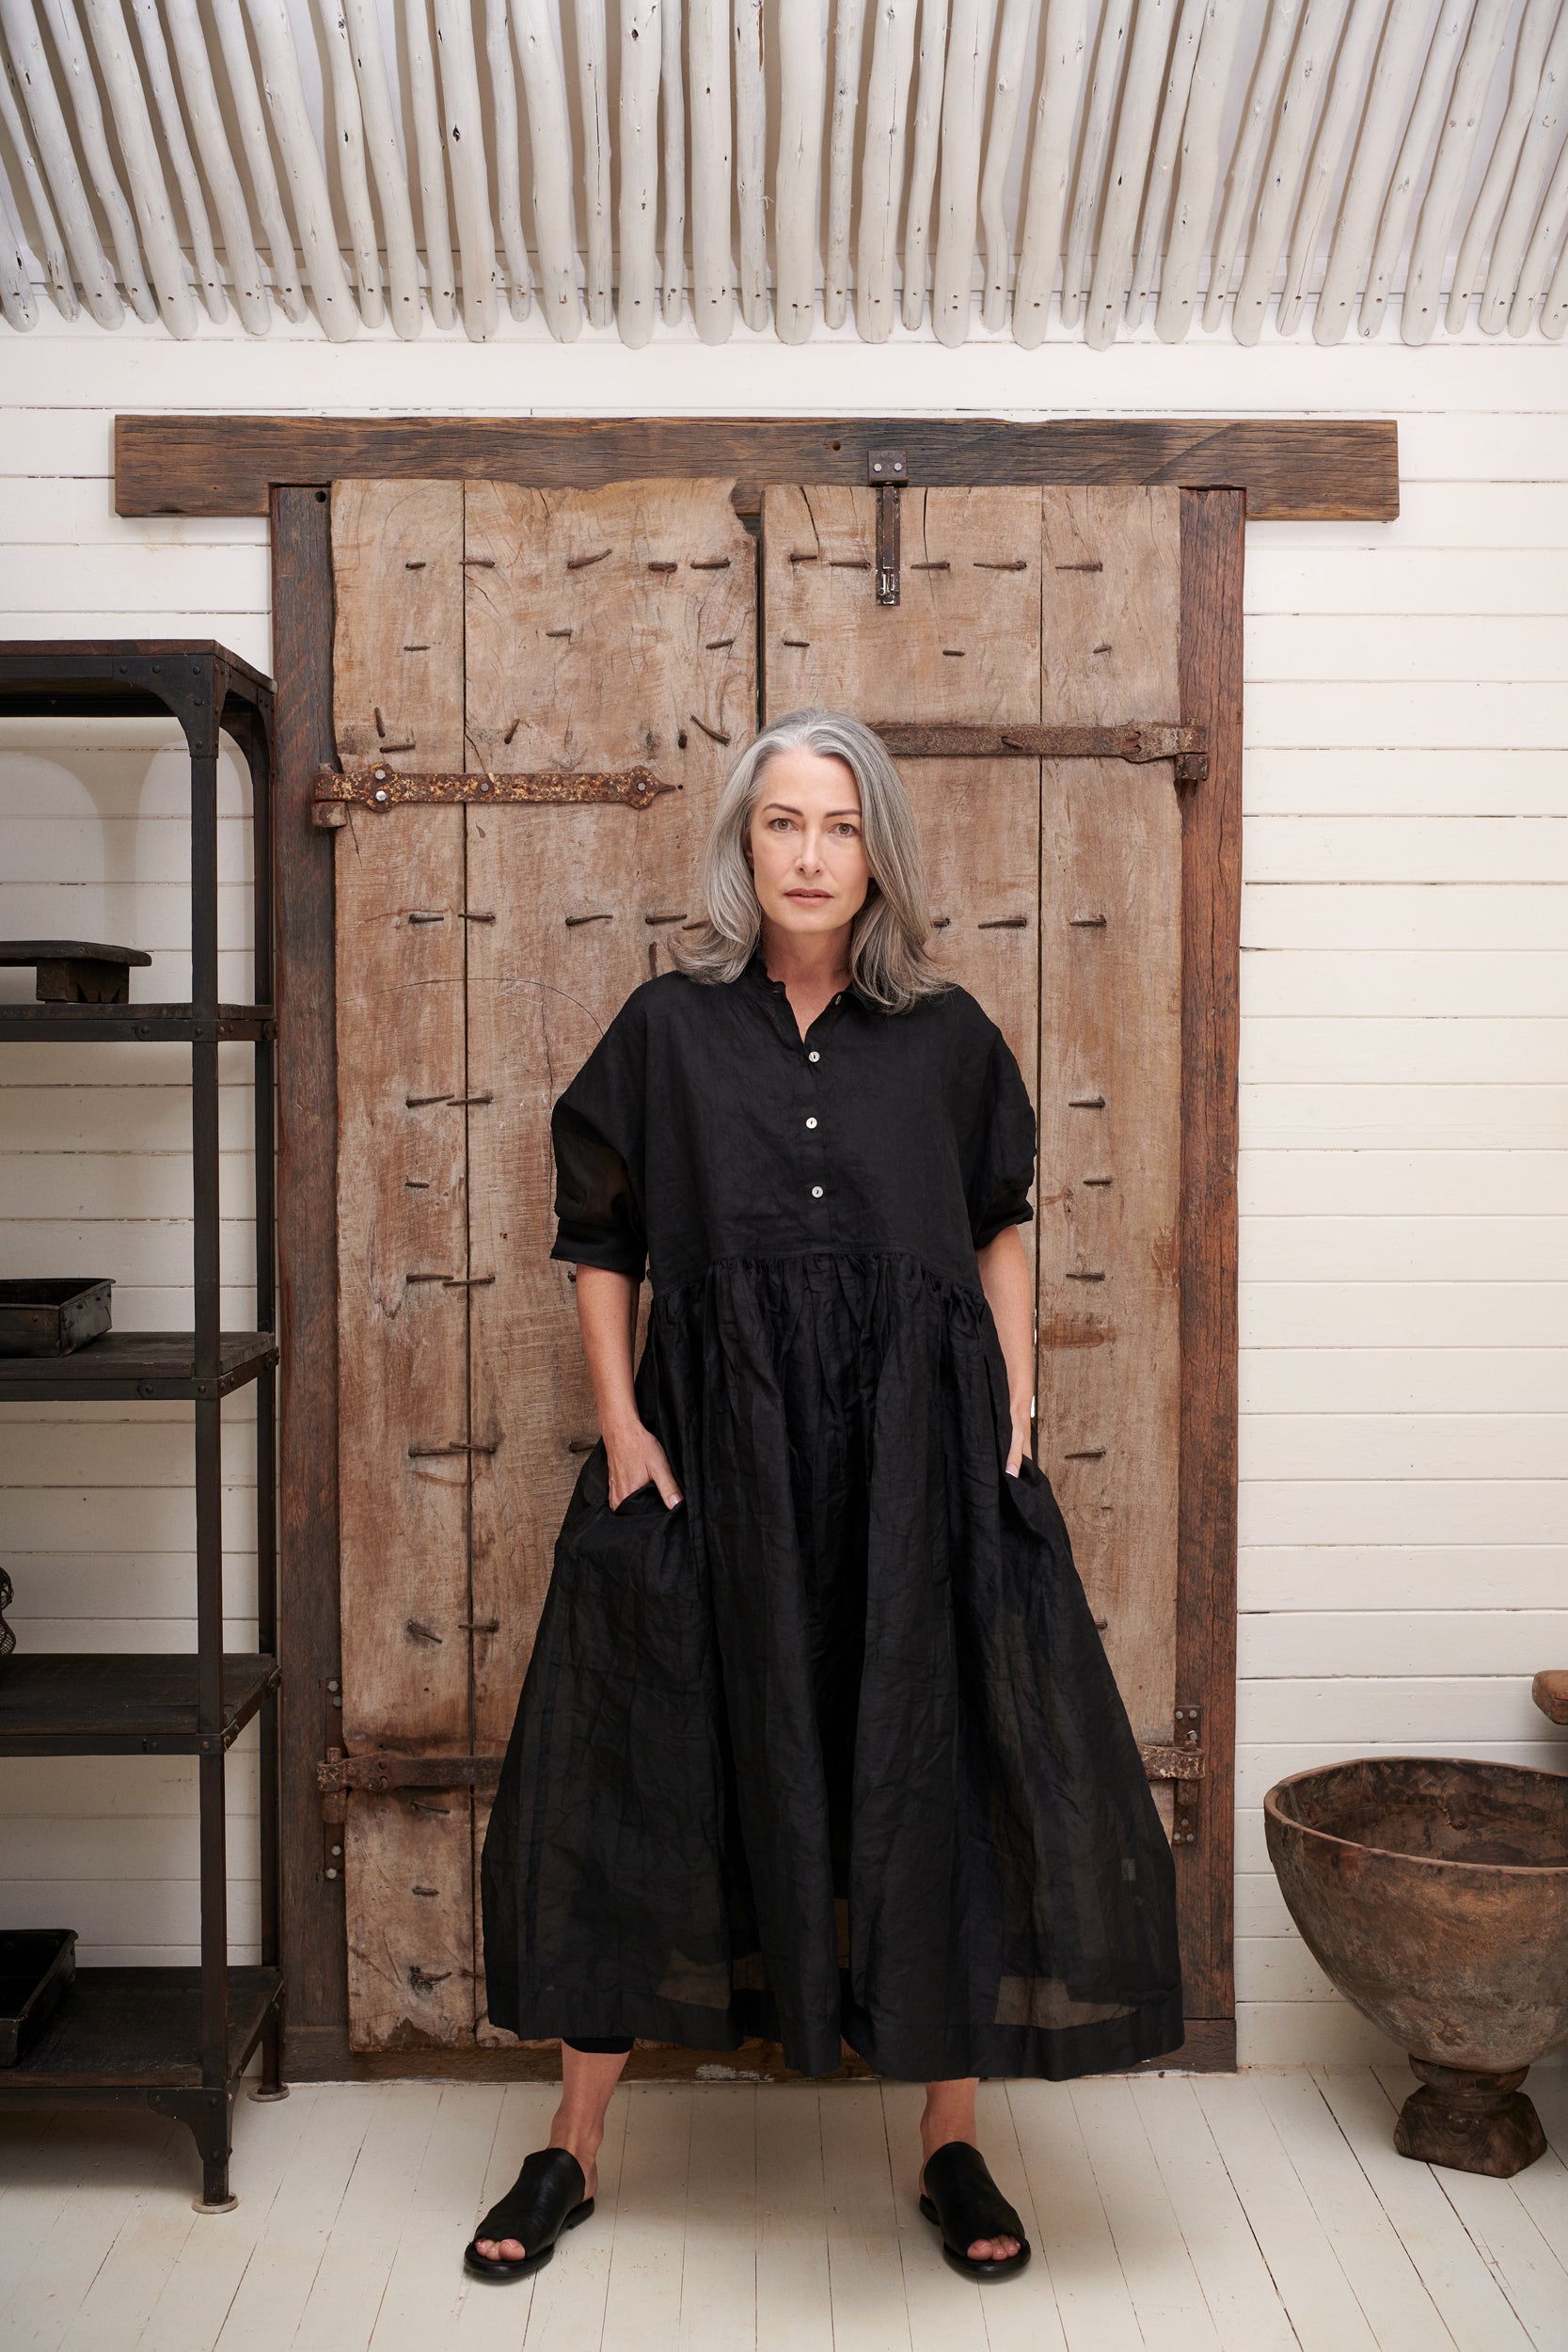 A MegbyDesign model is wearing a long black dress with side pockets, double stitching and a tiny collar to accent and give detail to the bodice.